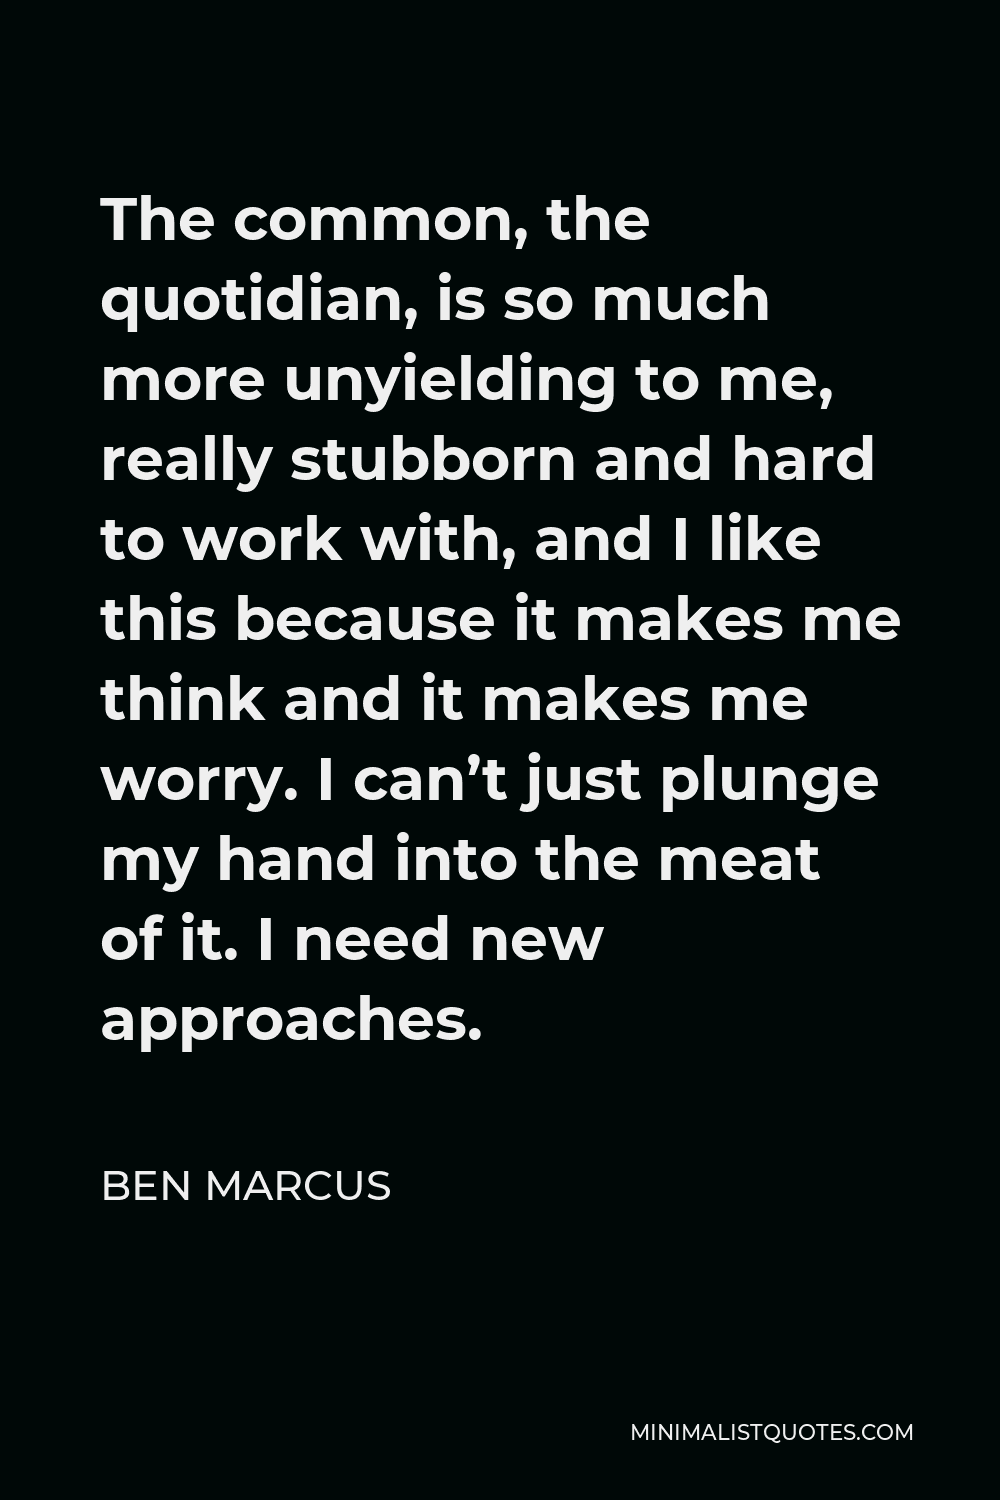 Ben Marcus Quote - The common, the quotidian, is so much more unyielding to me, really stubborn and hard to work with, and I like this because it makes me think and it makes me worry. I can’t just plunge my hand into the meat of it. I need new approaches.